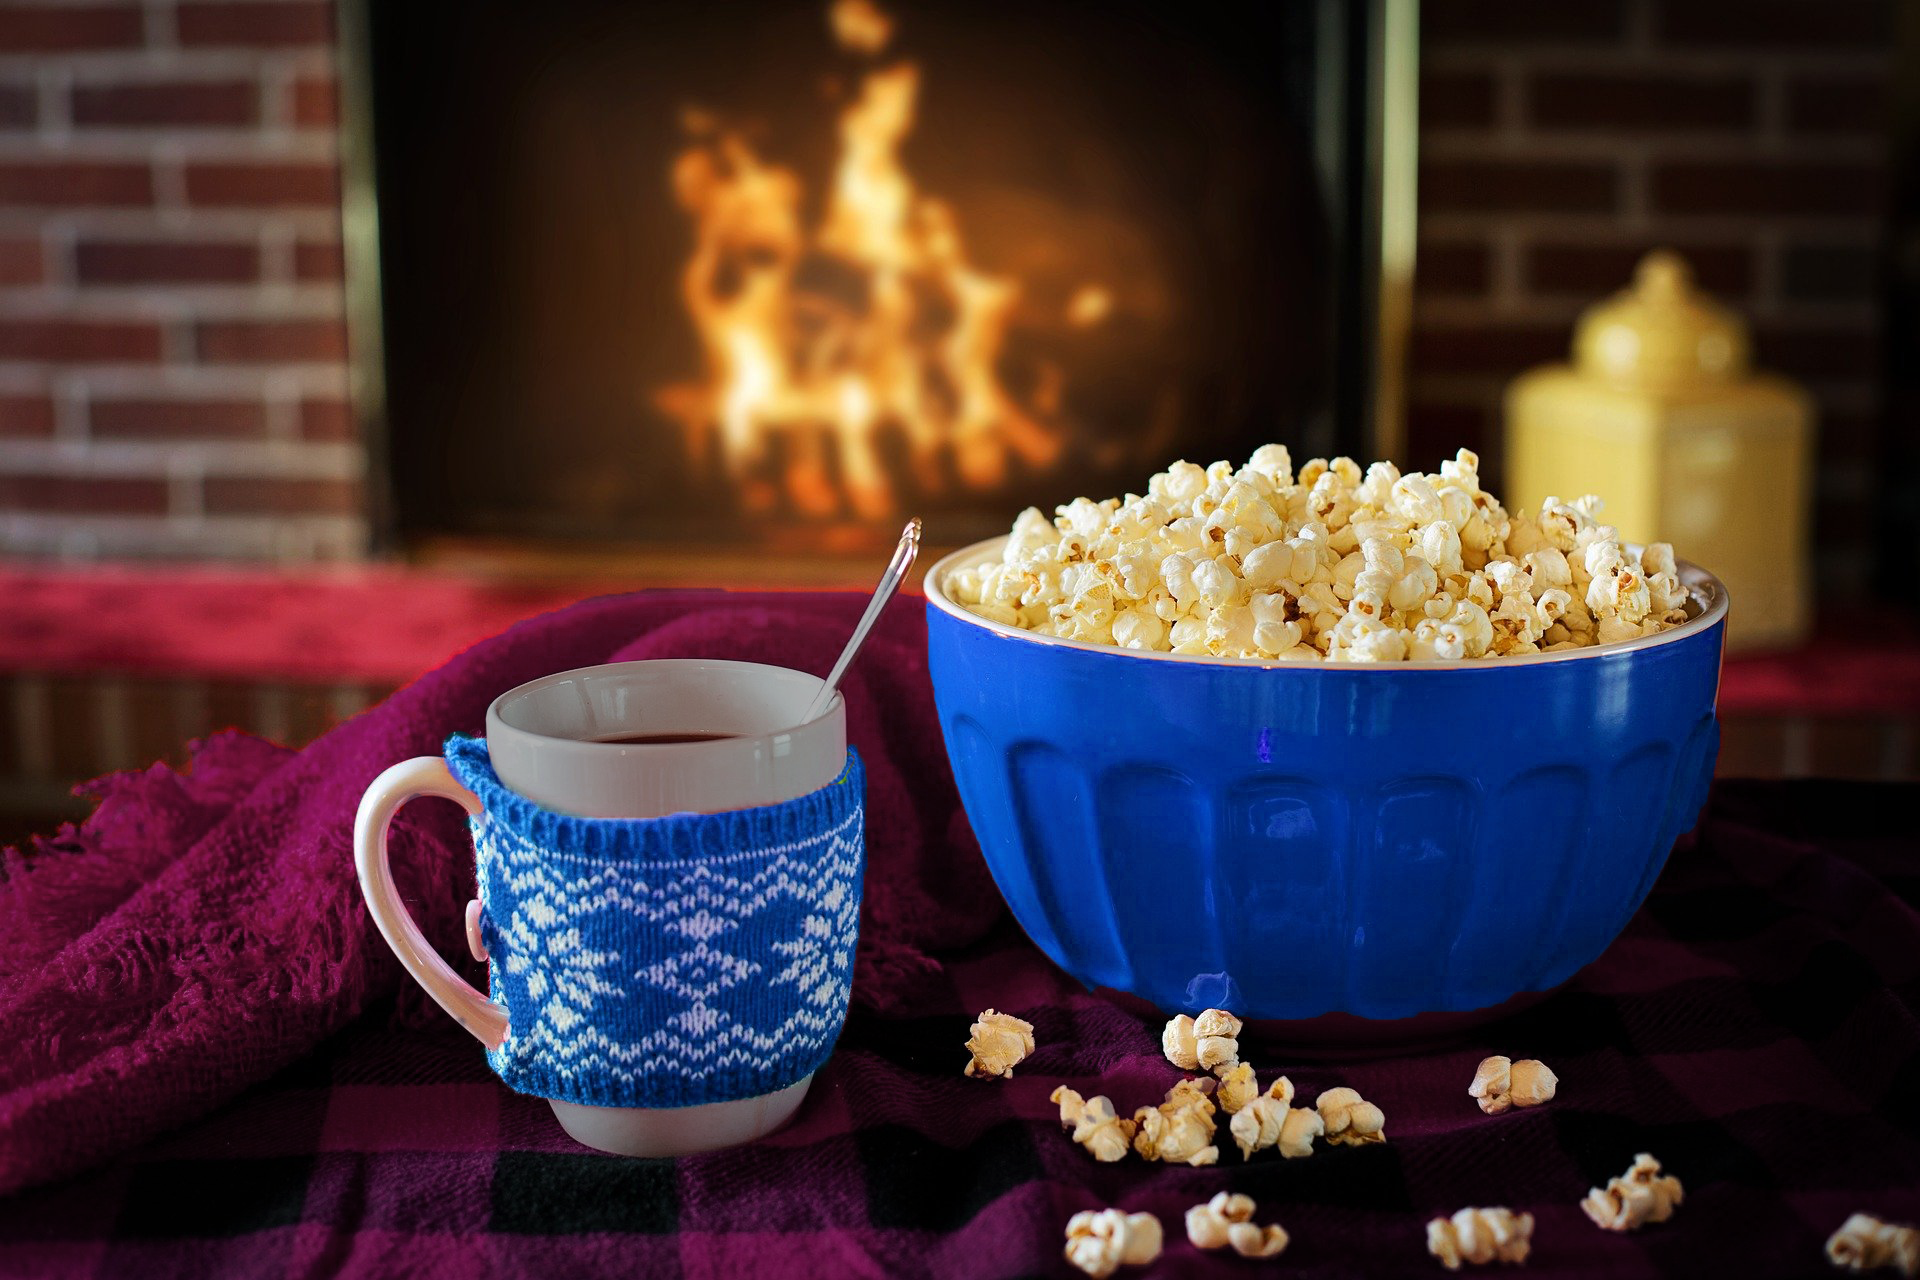 A bowl of popcorn and a mug of hot chocolate on a blanket in front of a fireplace.